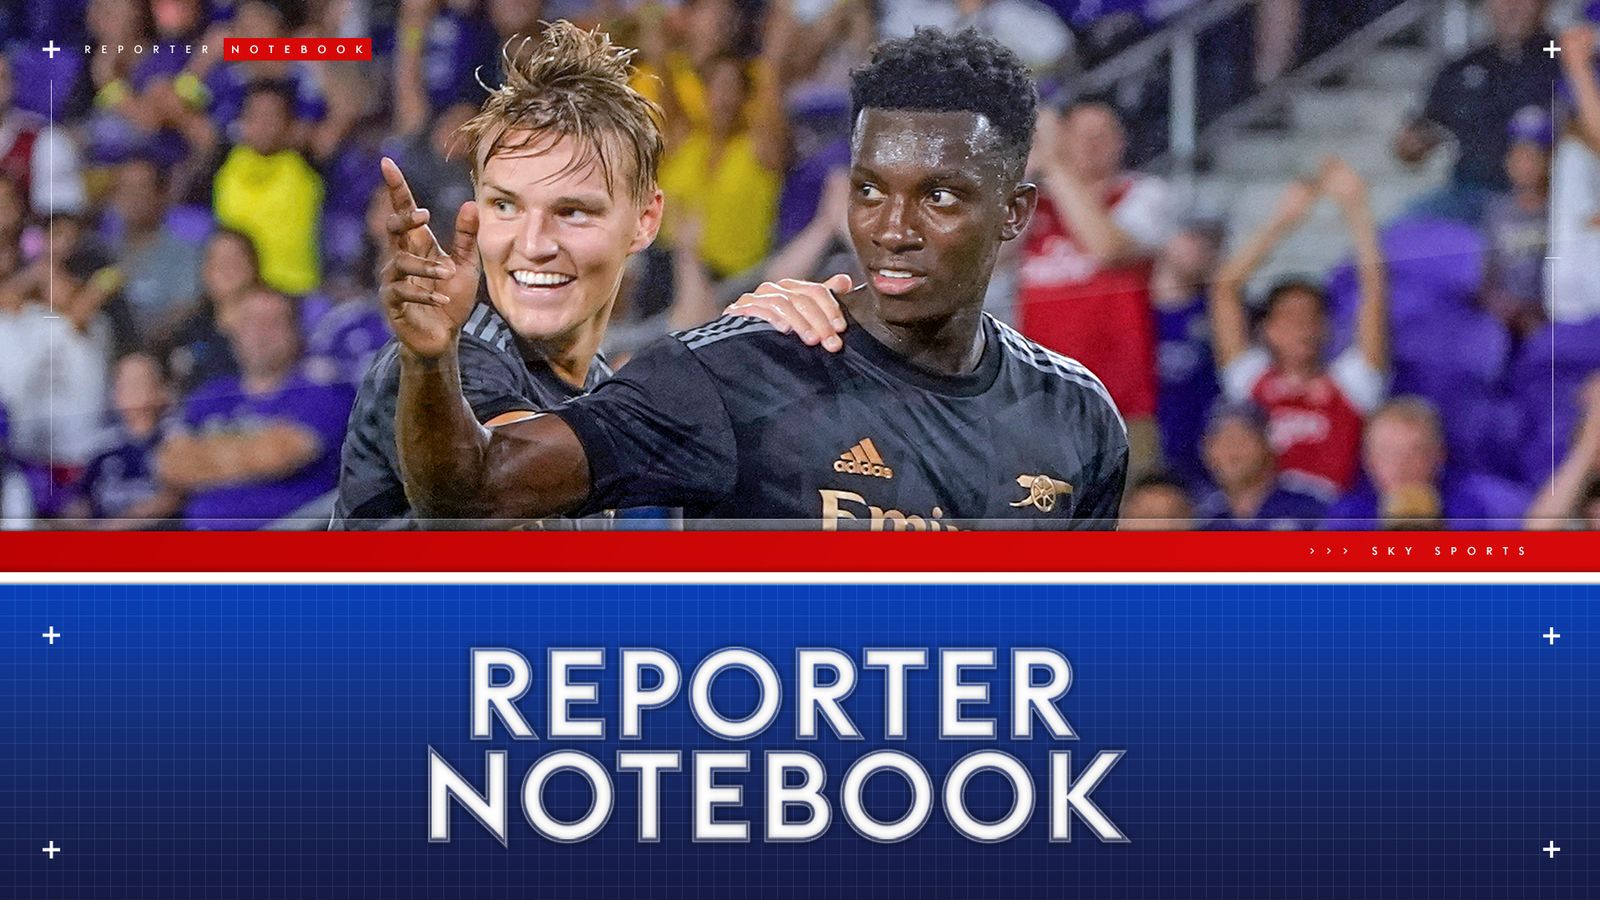 Reporter notebook: On tour with Arsenal in America | Football News